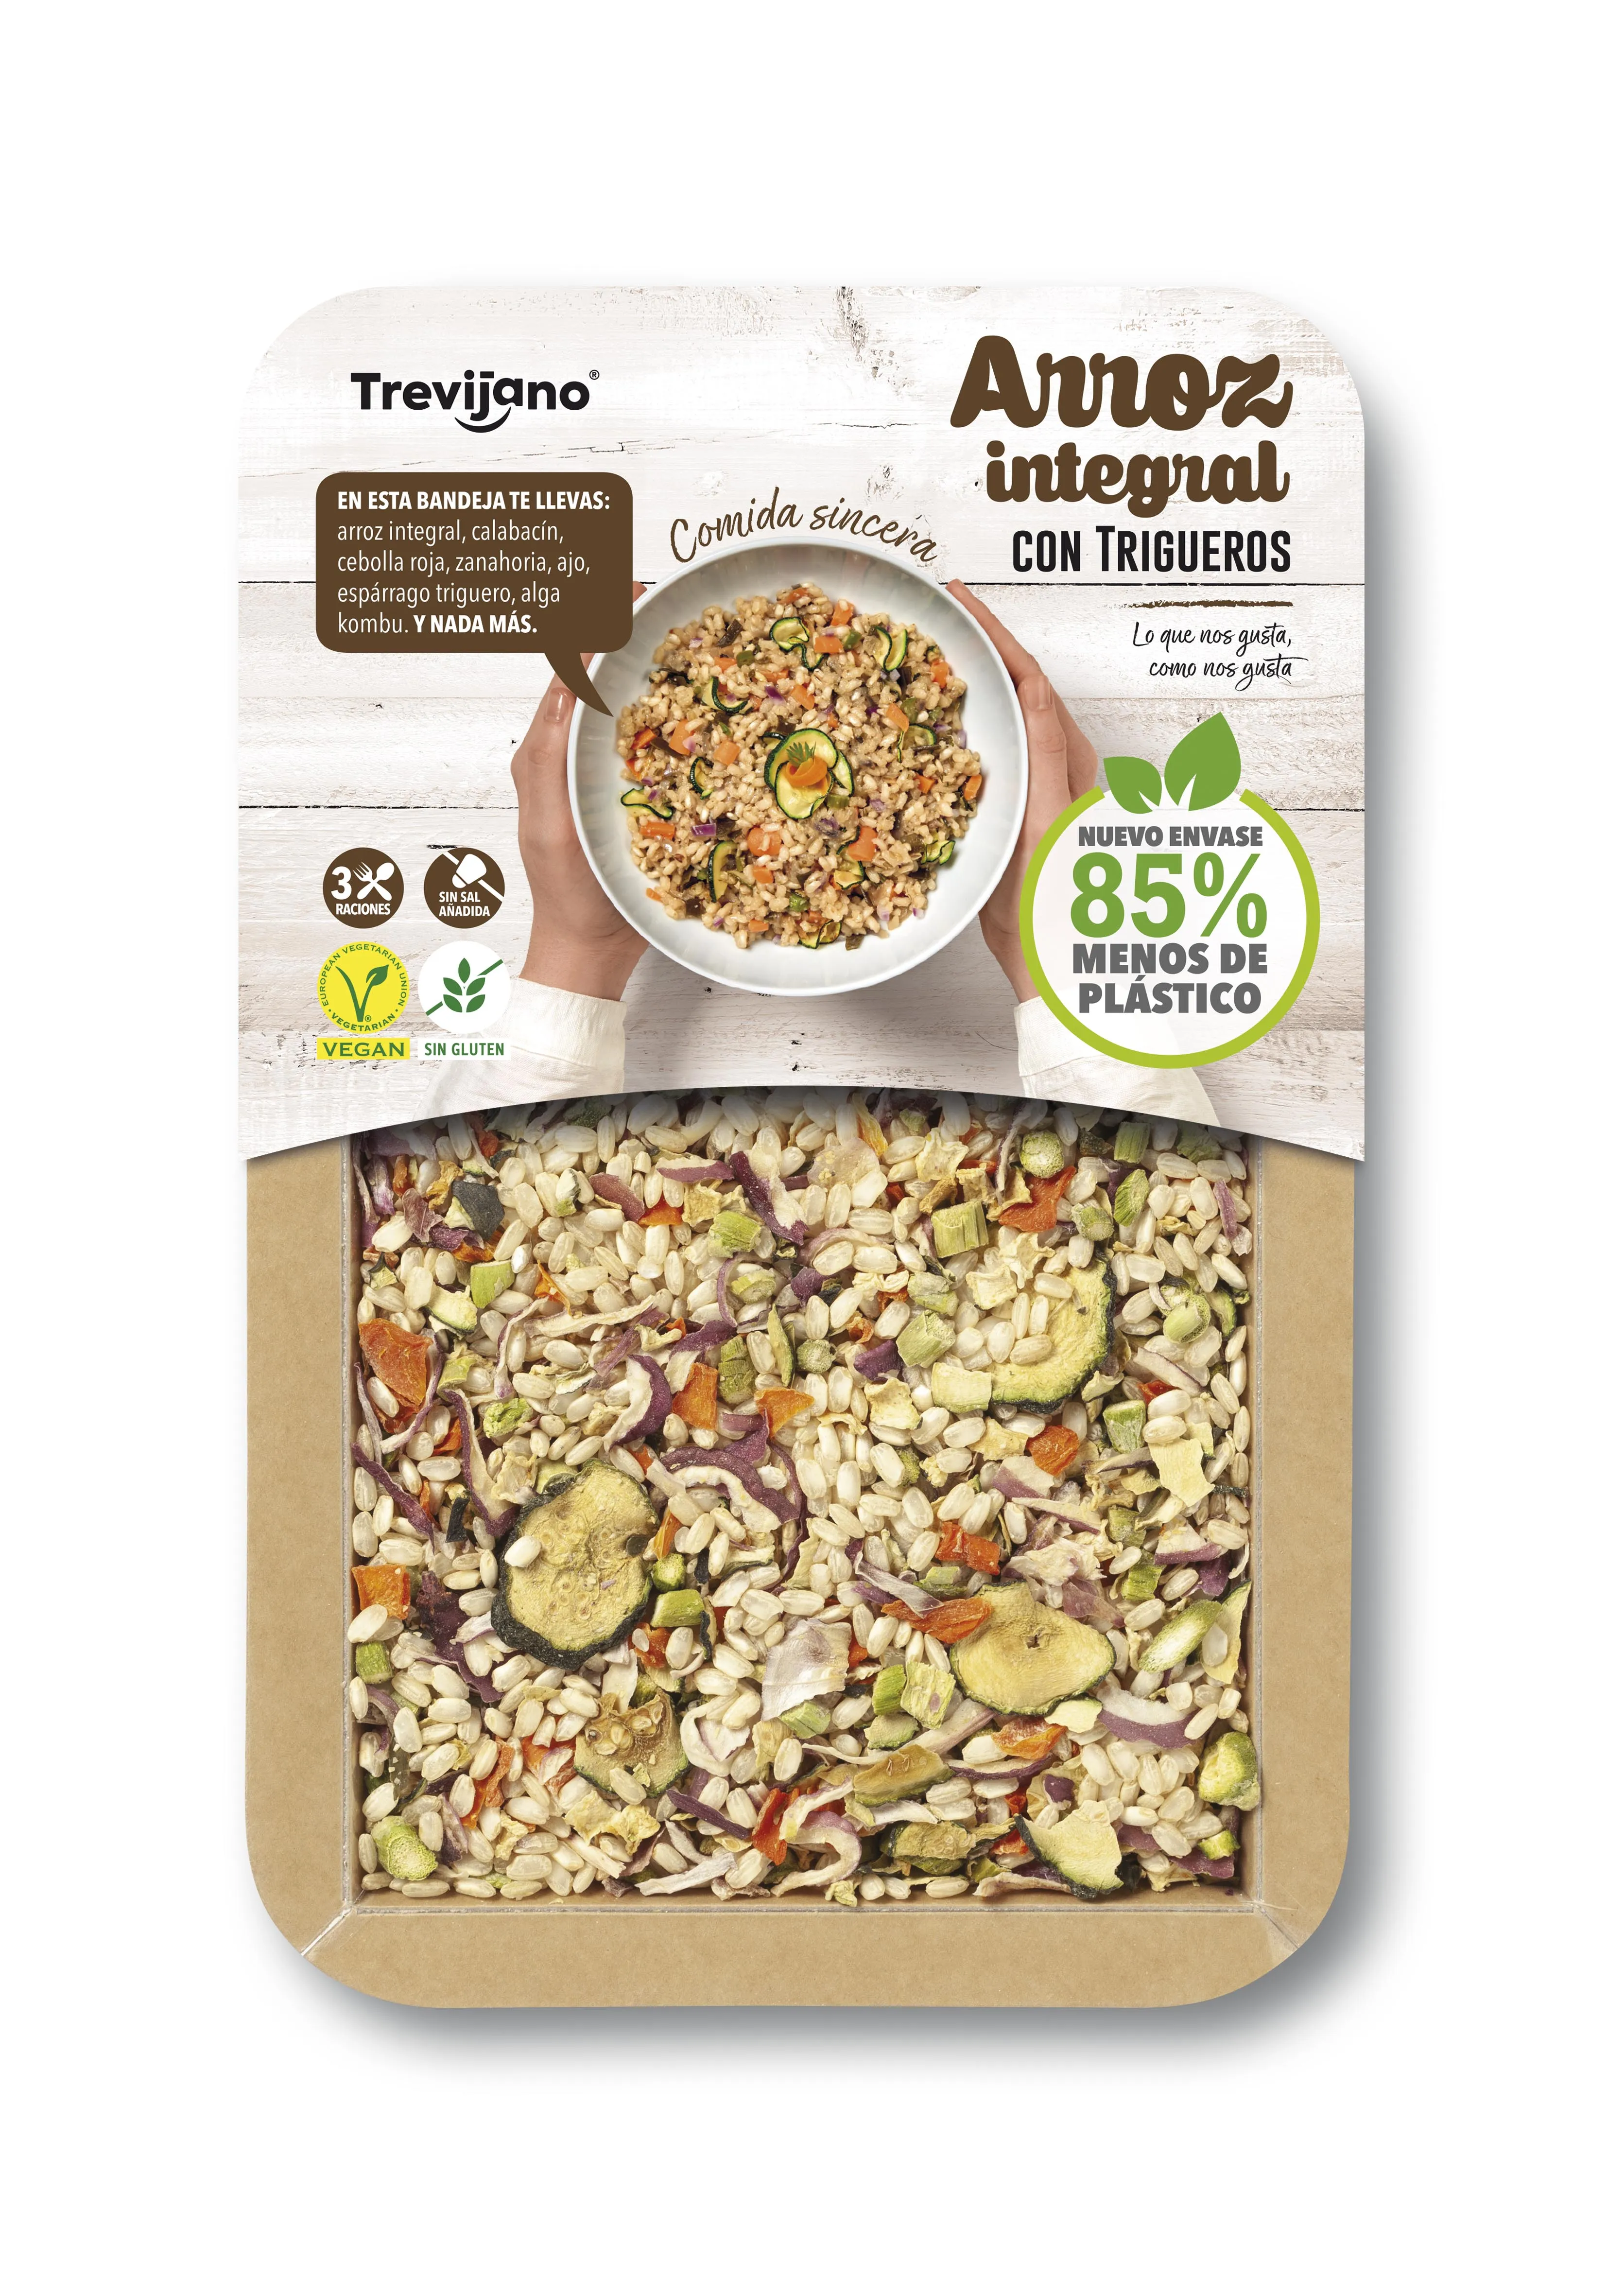 Vegan Quality Food from Spain Tray 250g Gluten Free BROWN RICE WITH ASPARAGUS and Dried Vegetables for Retail and restaurants